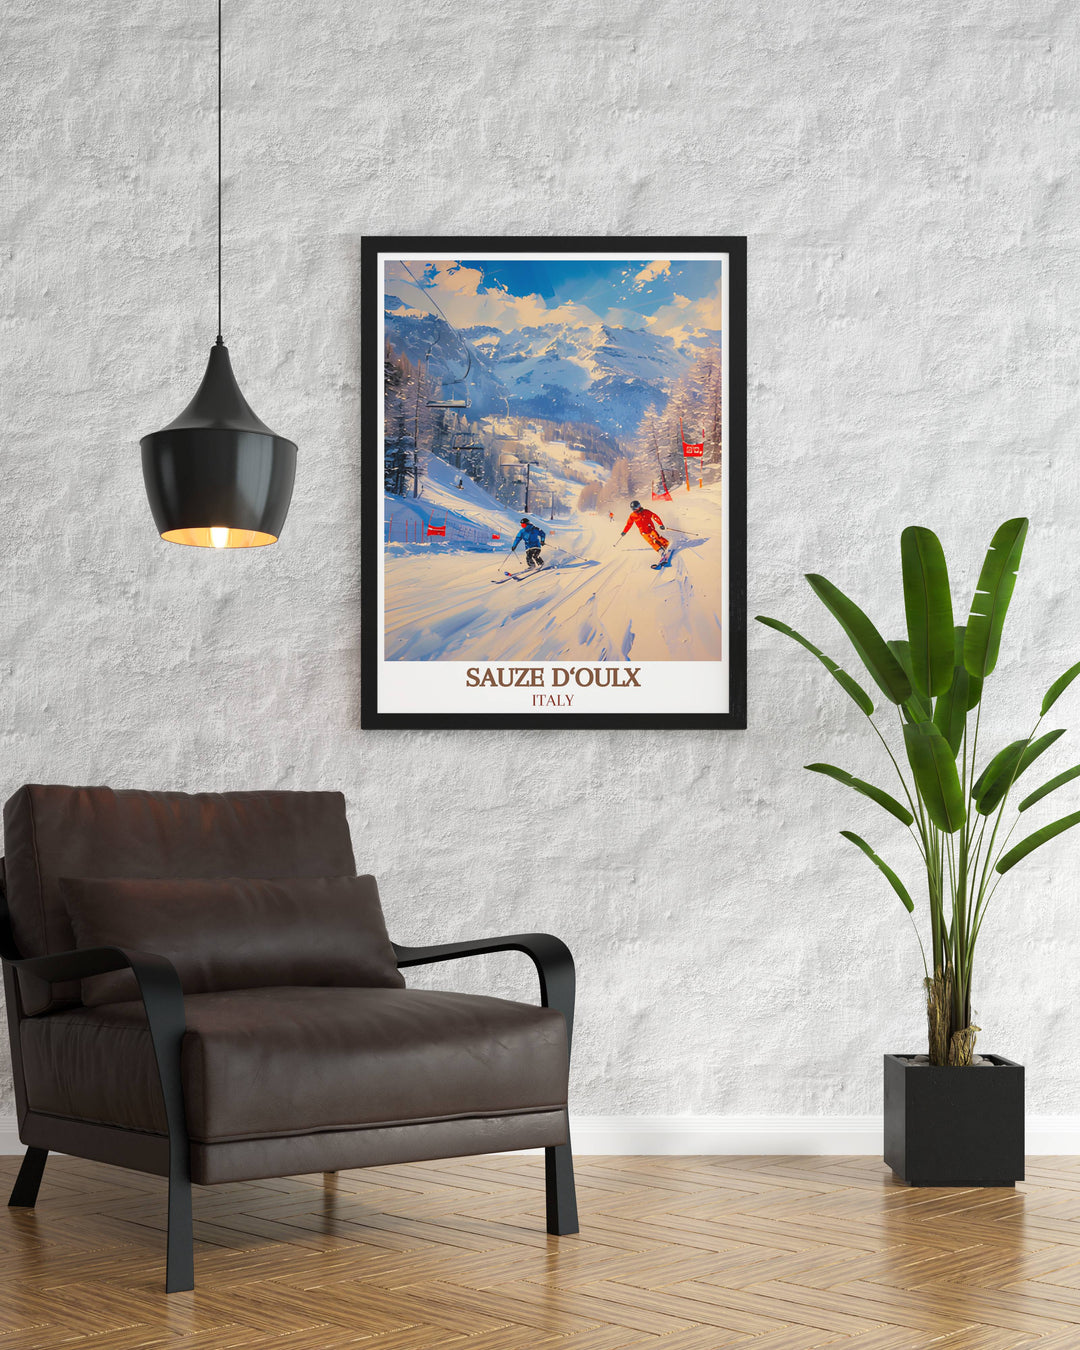 Stunning Ski Resort Framed Art featuring Sauze dOulx, showcasing the serene beauty and sophisticated allure of this top skiing destination.